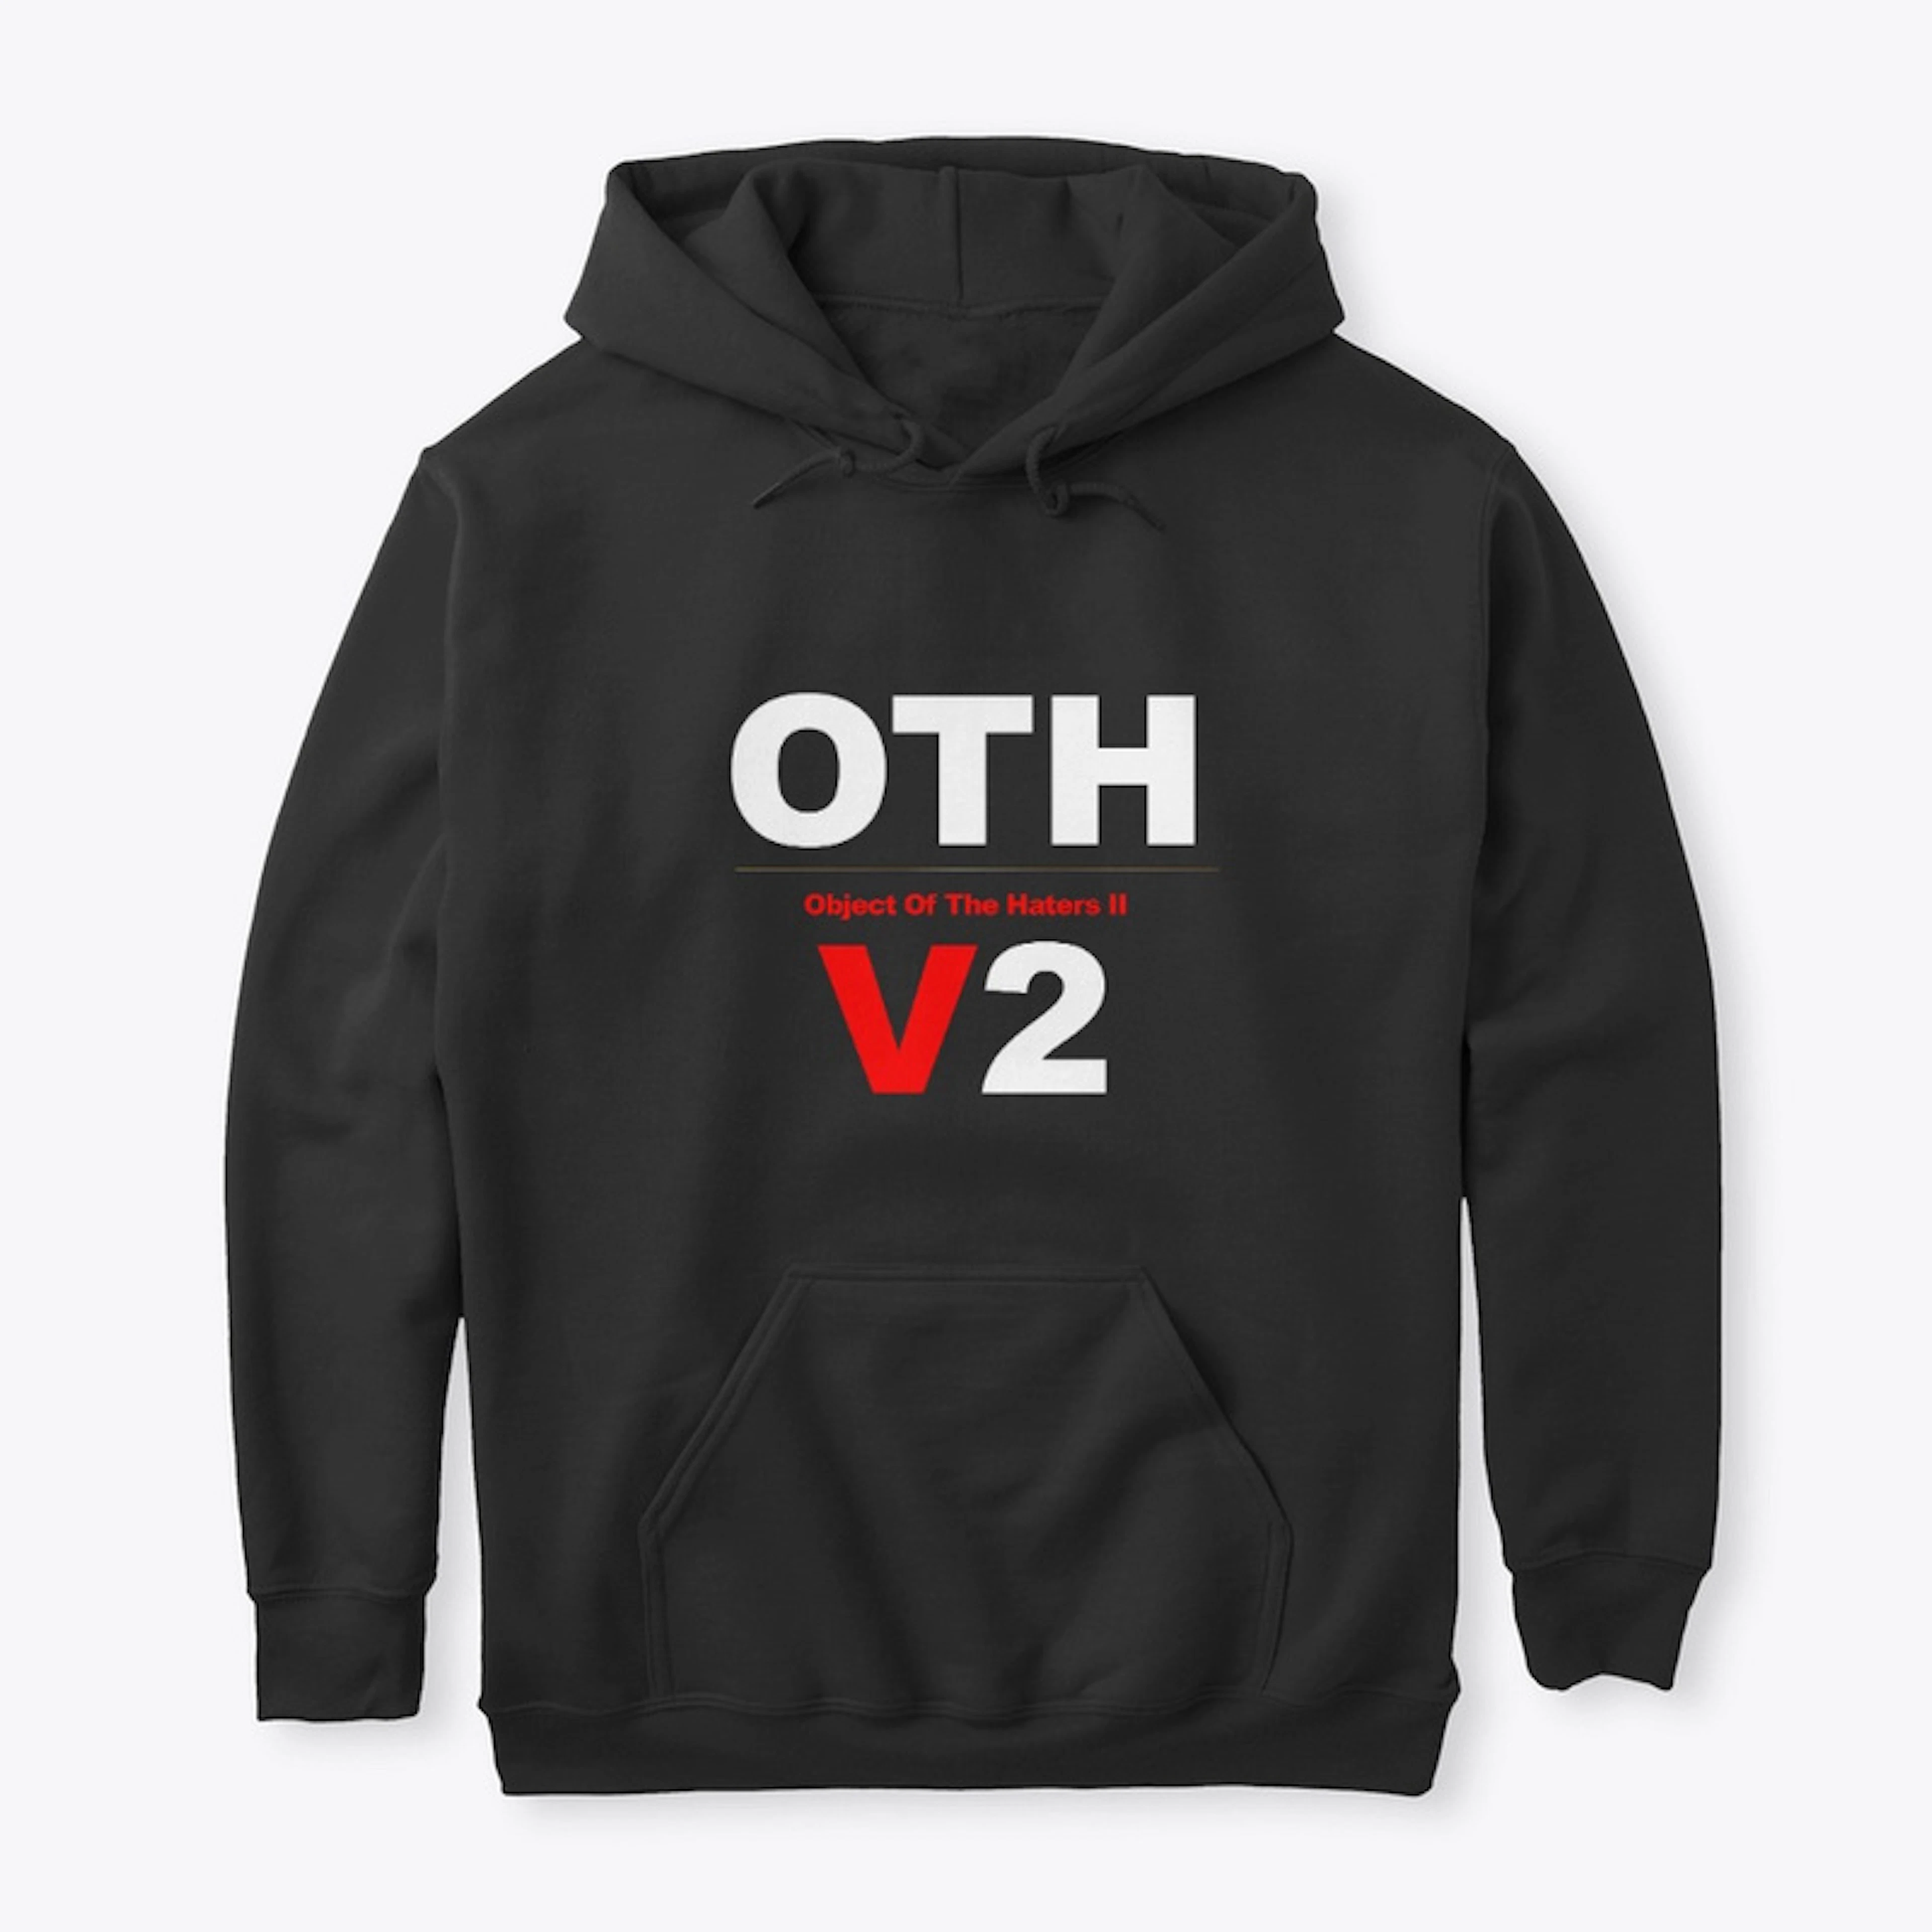 Object Of The Haters v2 Hoodie and Merch